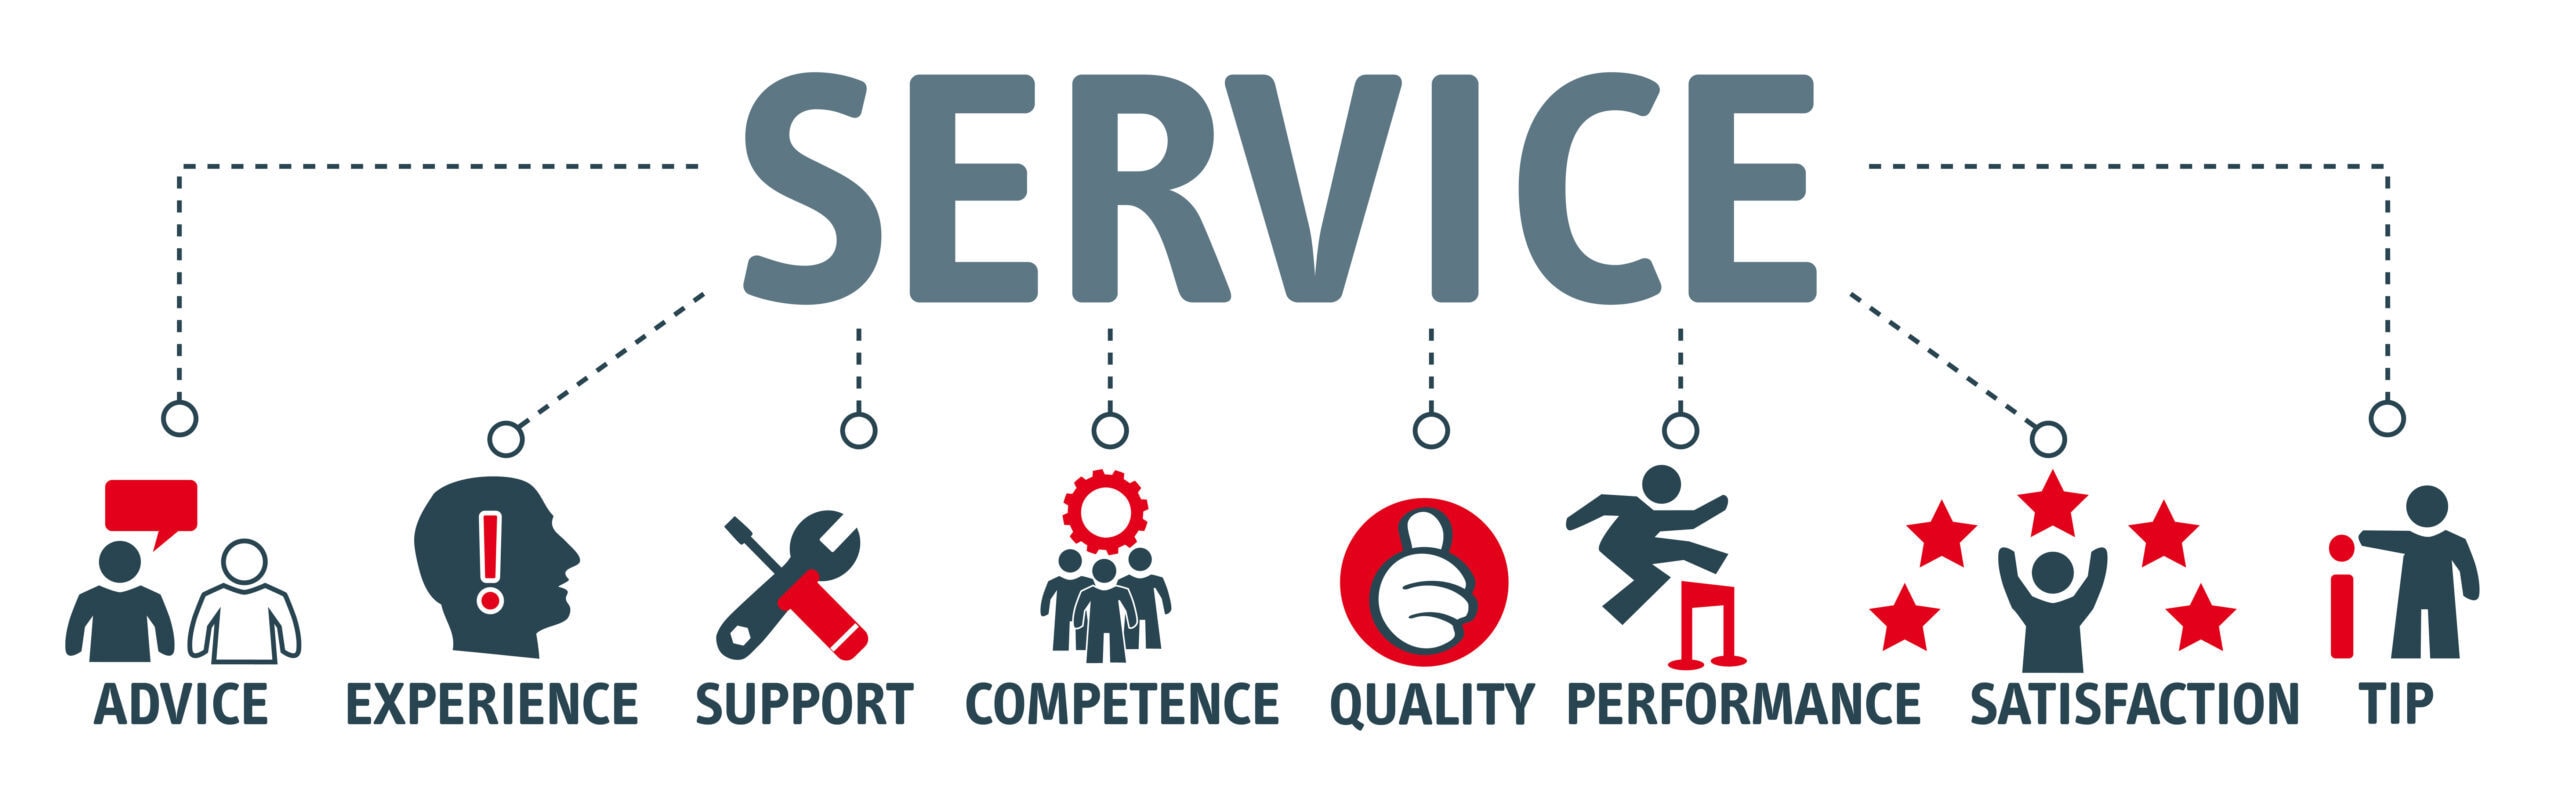 Banner Service concept. Keywords and pictograms